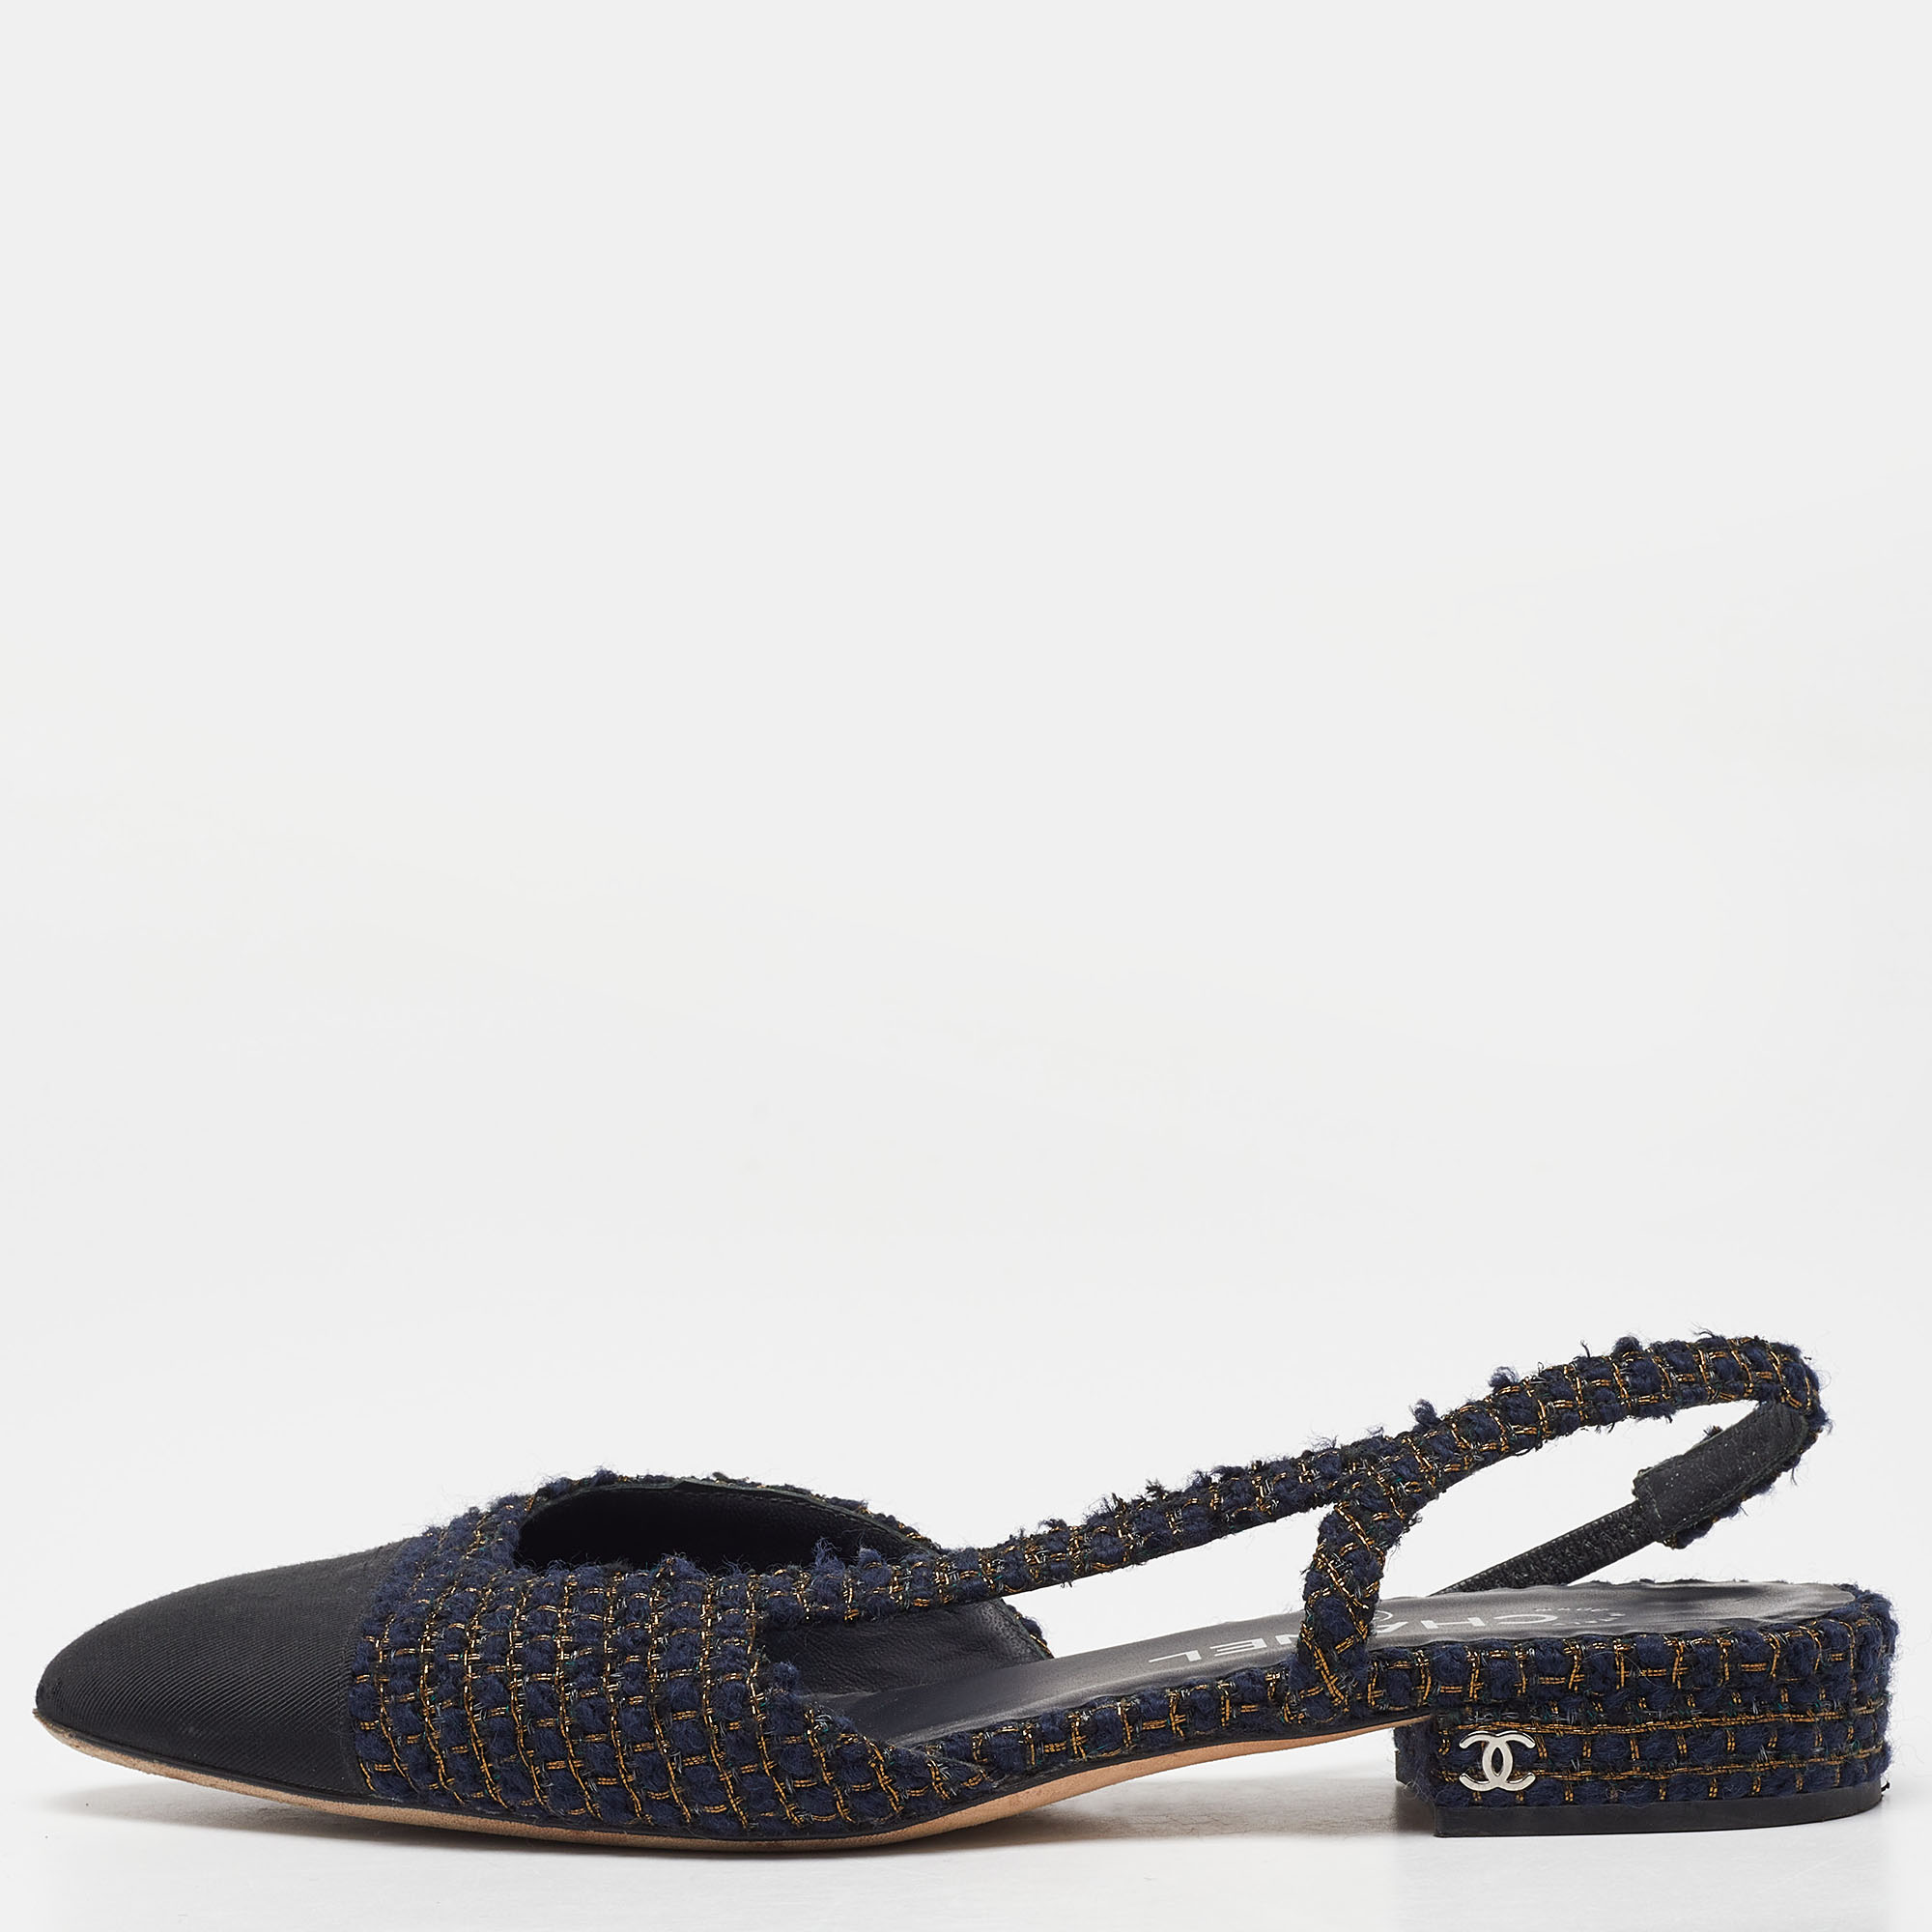 

Chanel Blue/Black Tweed and Canvas CC Toe Slingback Sandals Size